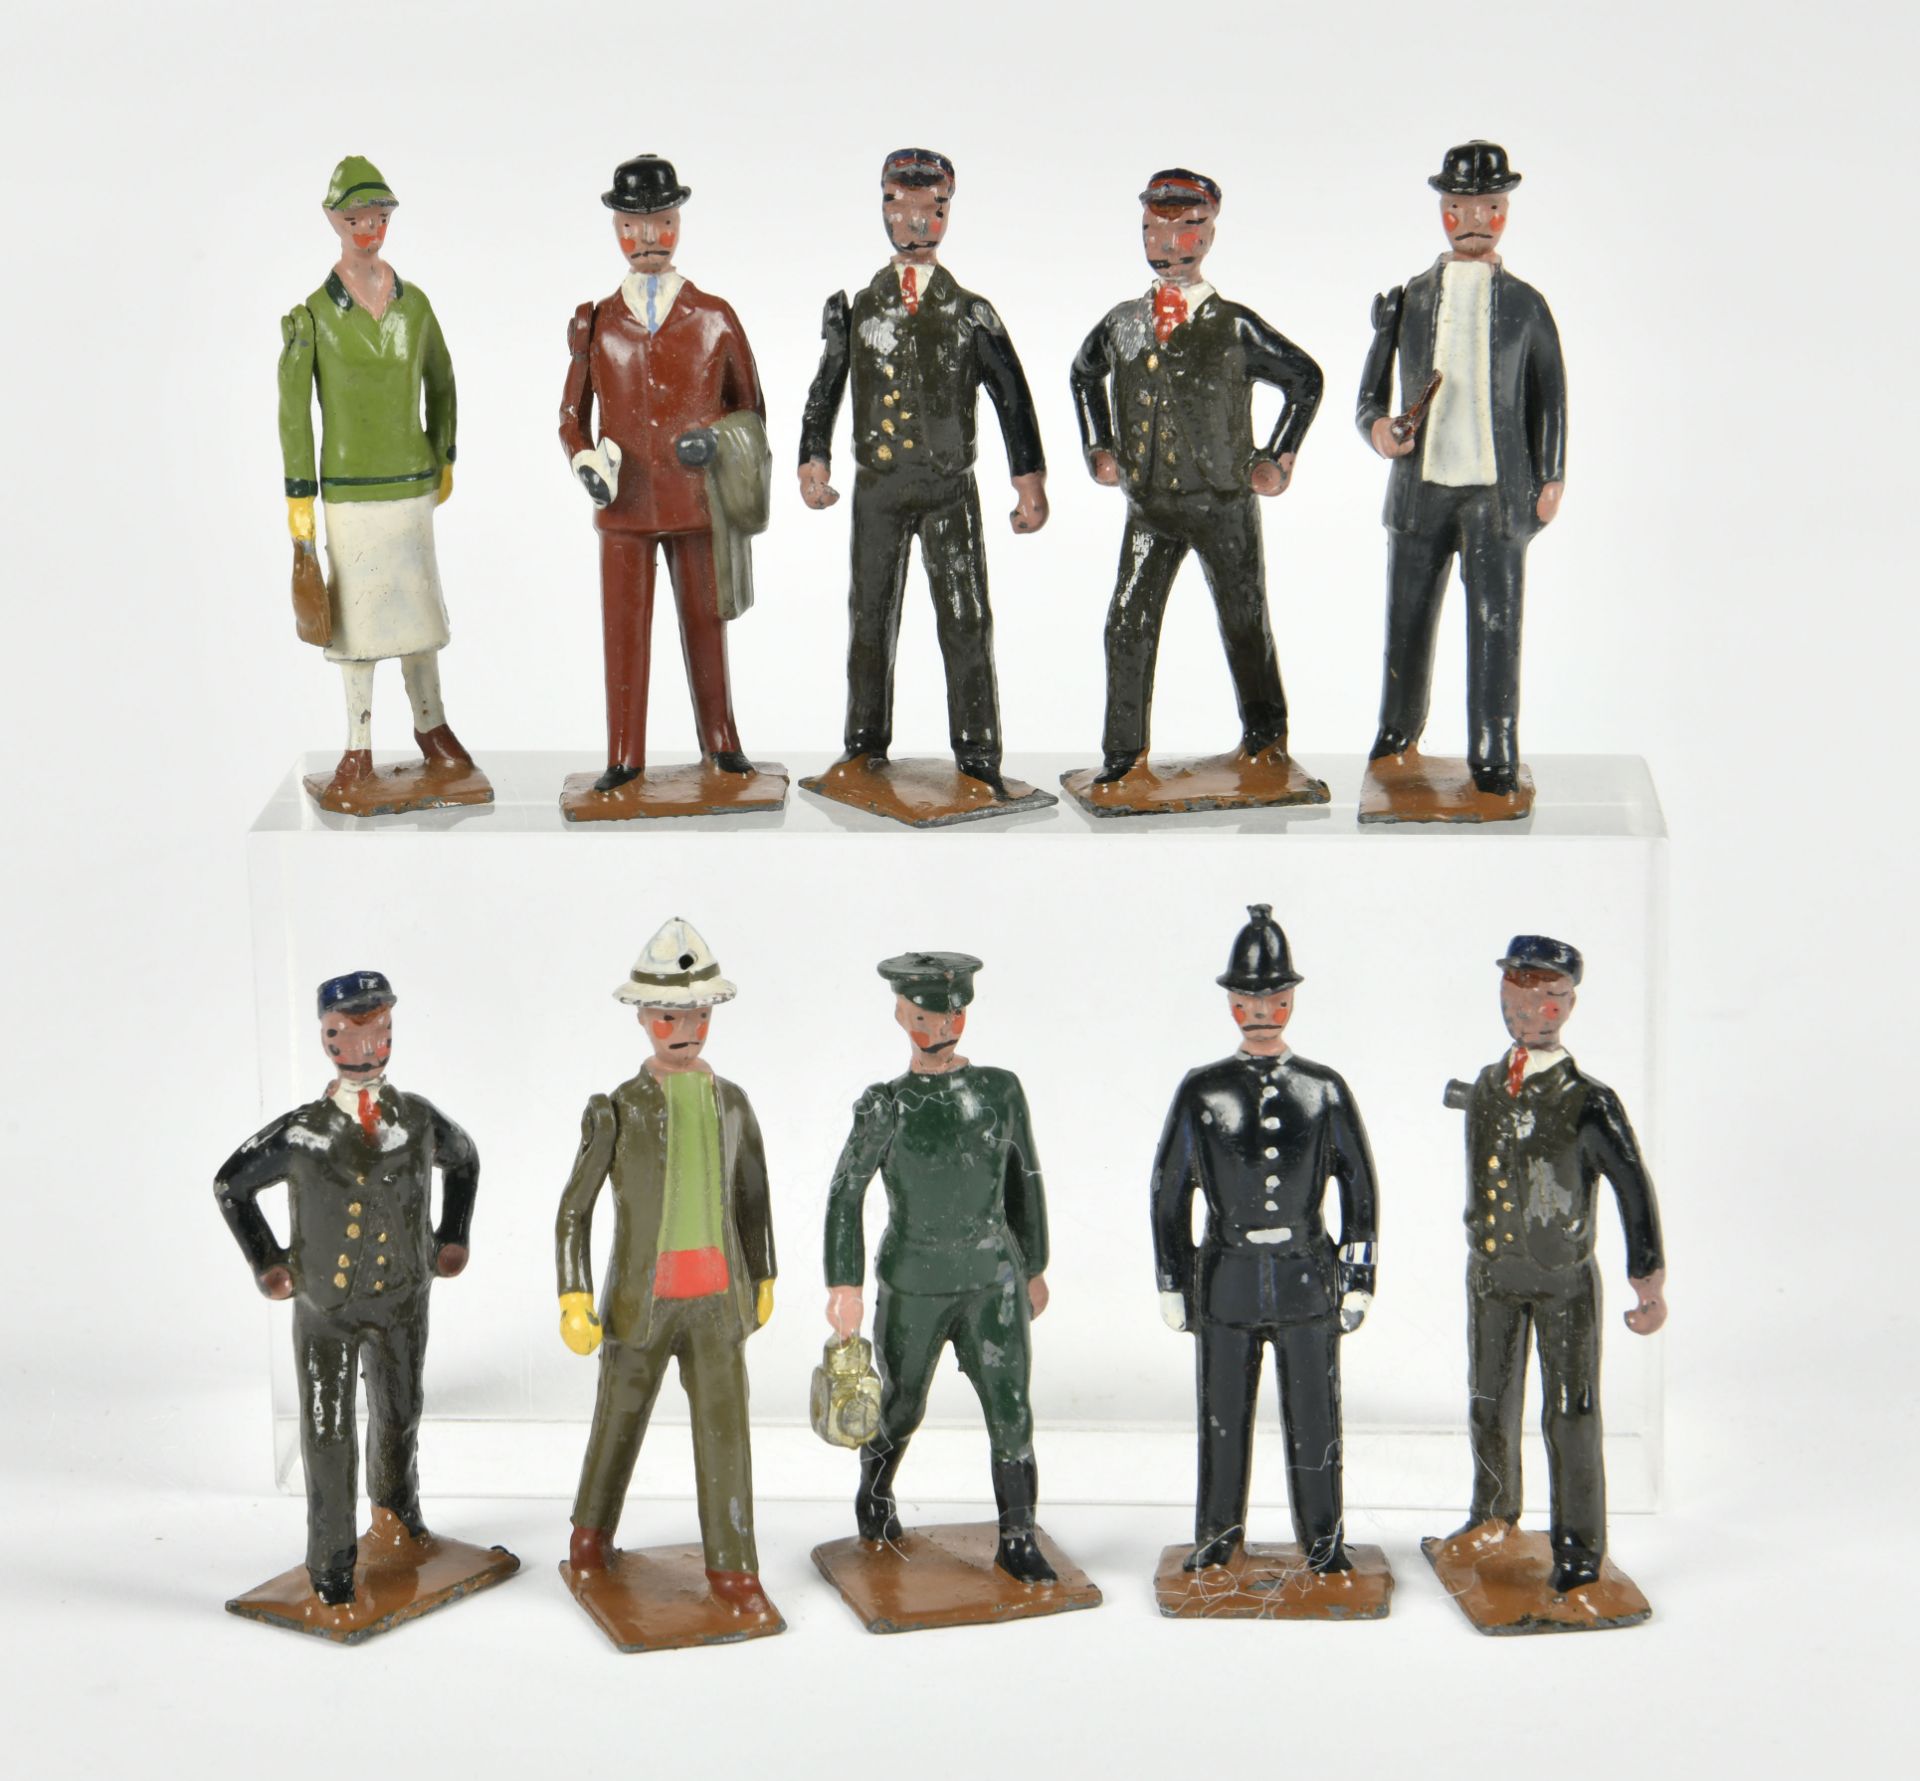 Britains, 10 railway figures, England, 6 cm, diecast, 1 arm missing, otherwise good